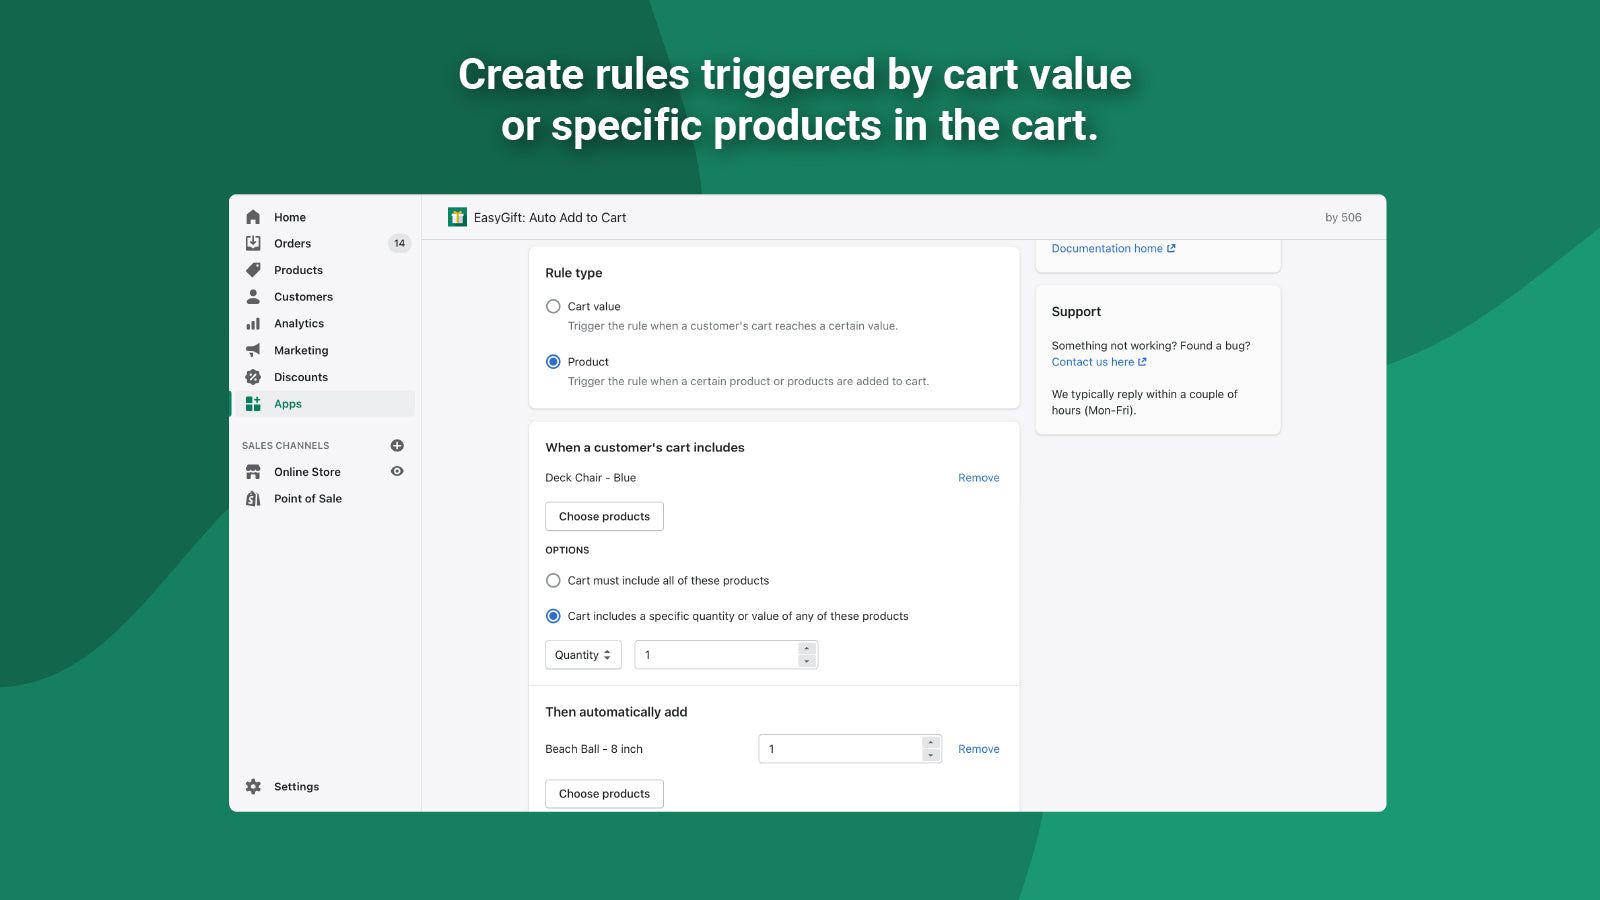 Create rules based on cart value or products in cart.